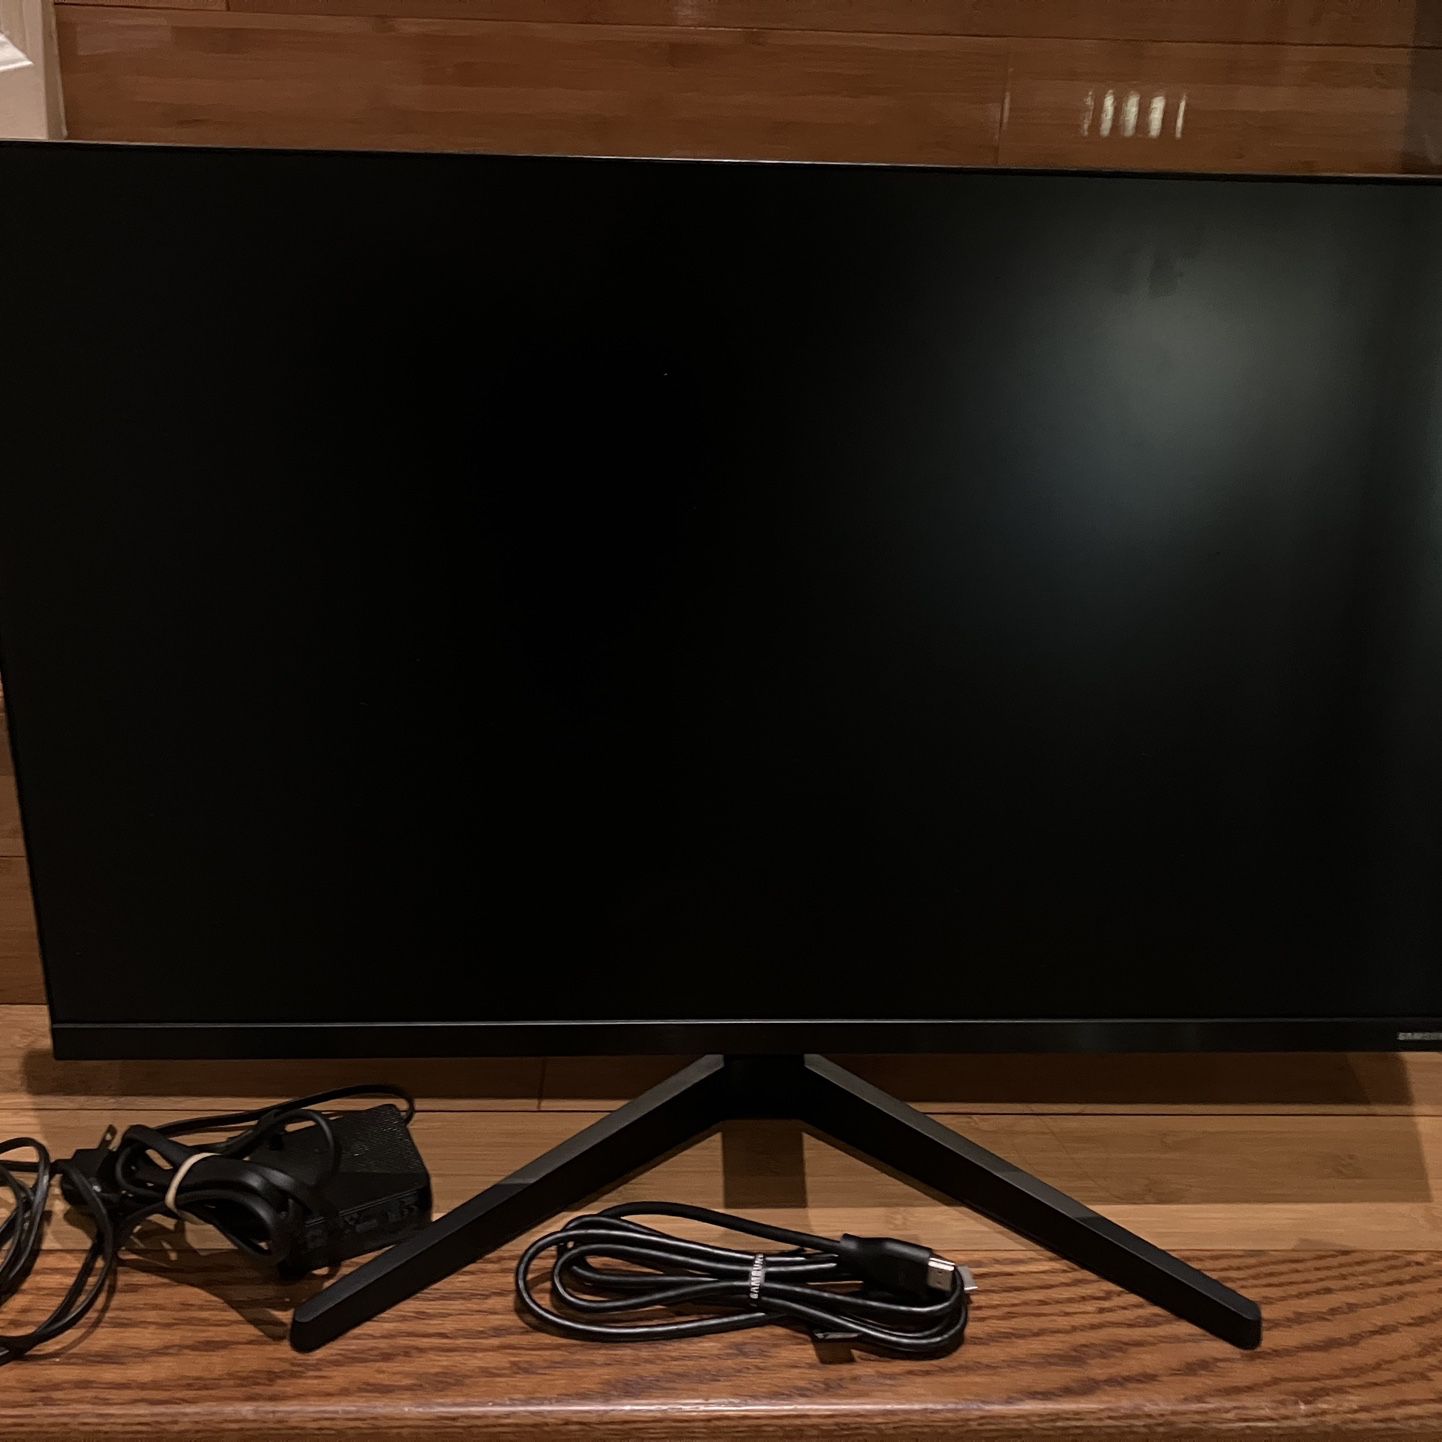 SAMSUNG T35F Series 27-Inch FHD 1080p Computer Monitor, 75Hz, IPS Panel,  HDMI, VGA (D-Sub), 3-Sided Border-Less, FreeSync (LF27T350FHNXZA) for Sale  in Irwindale, CA OfferUp